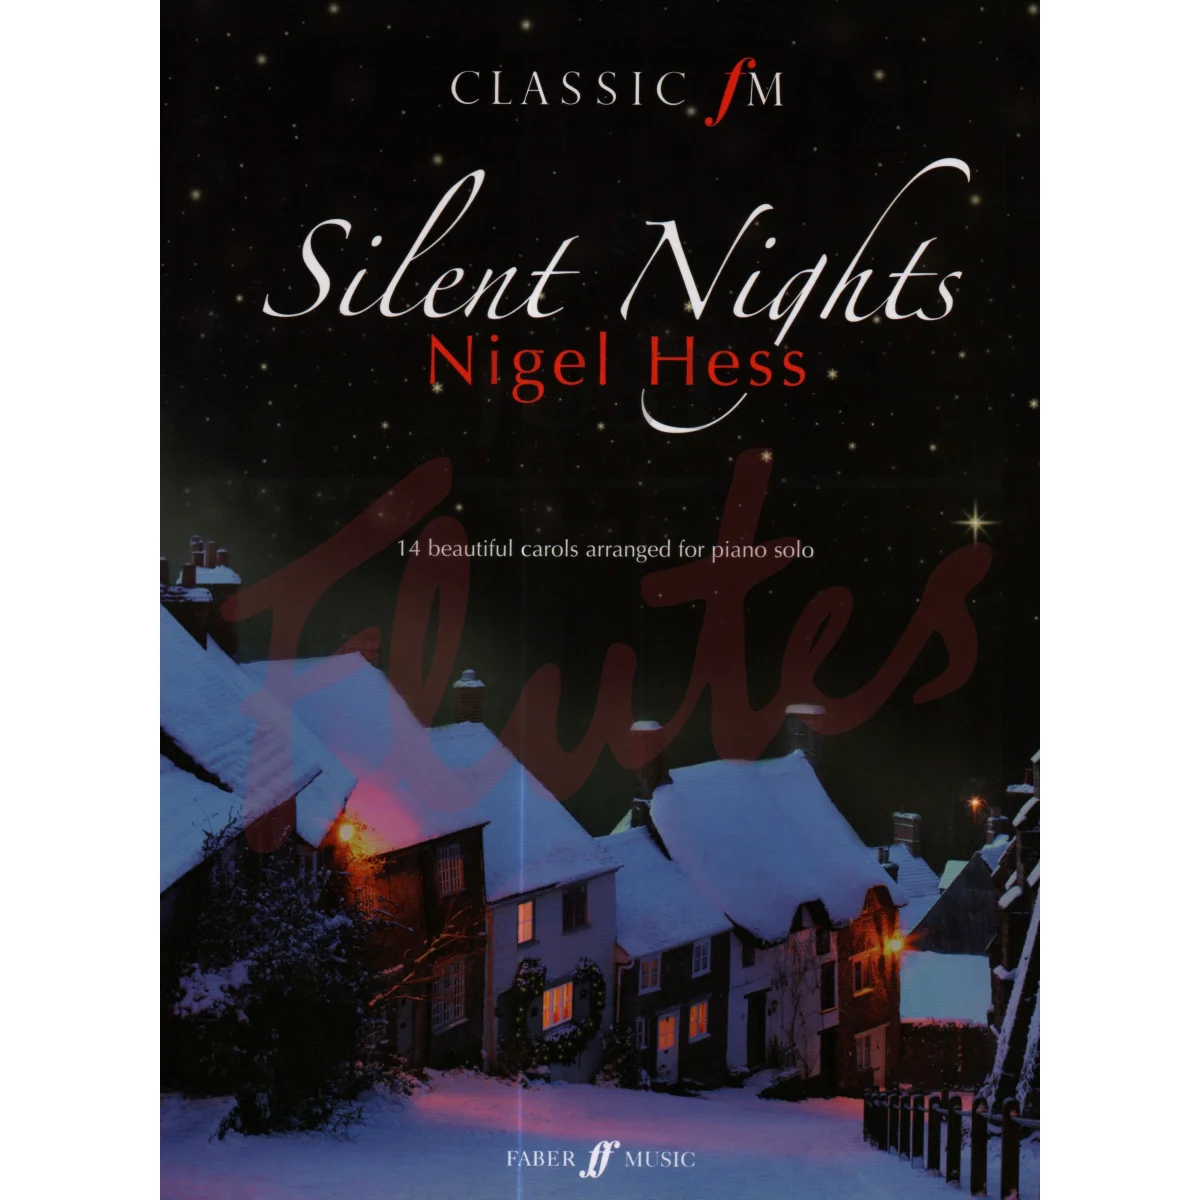 Classic FM: Silent Nights for Piano